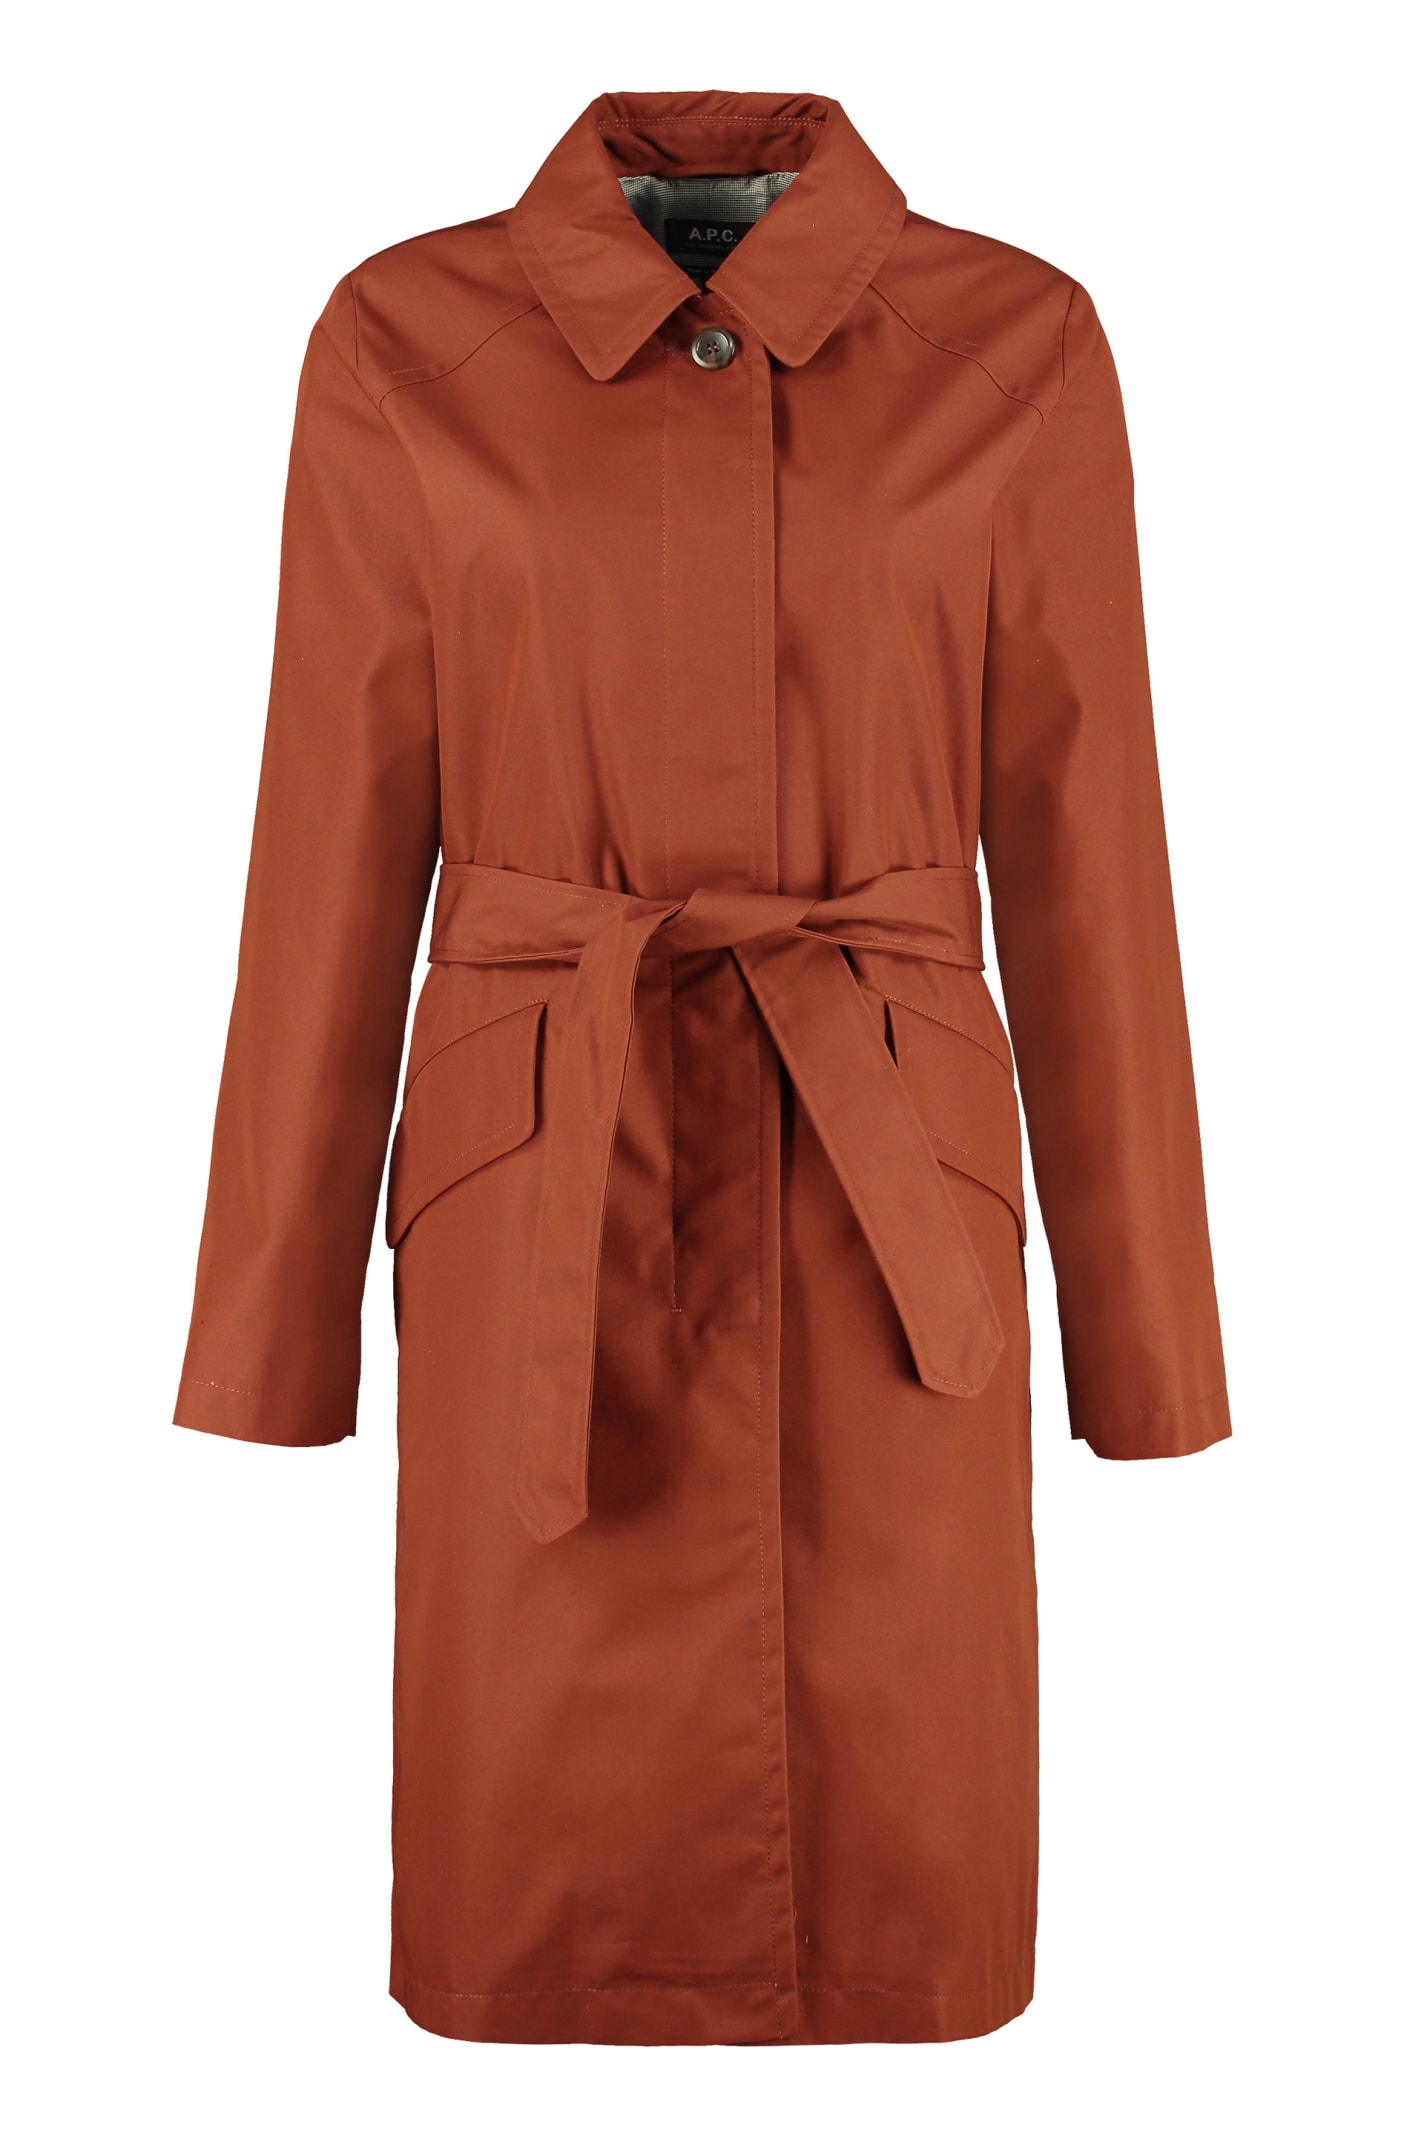 APC LUCIENNE COTTON TRENCH COAT,11650519